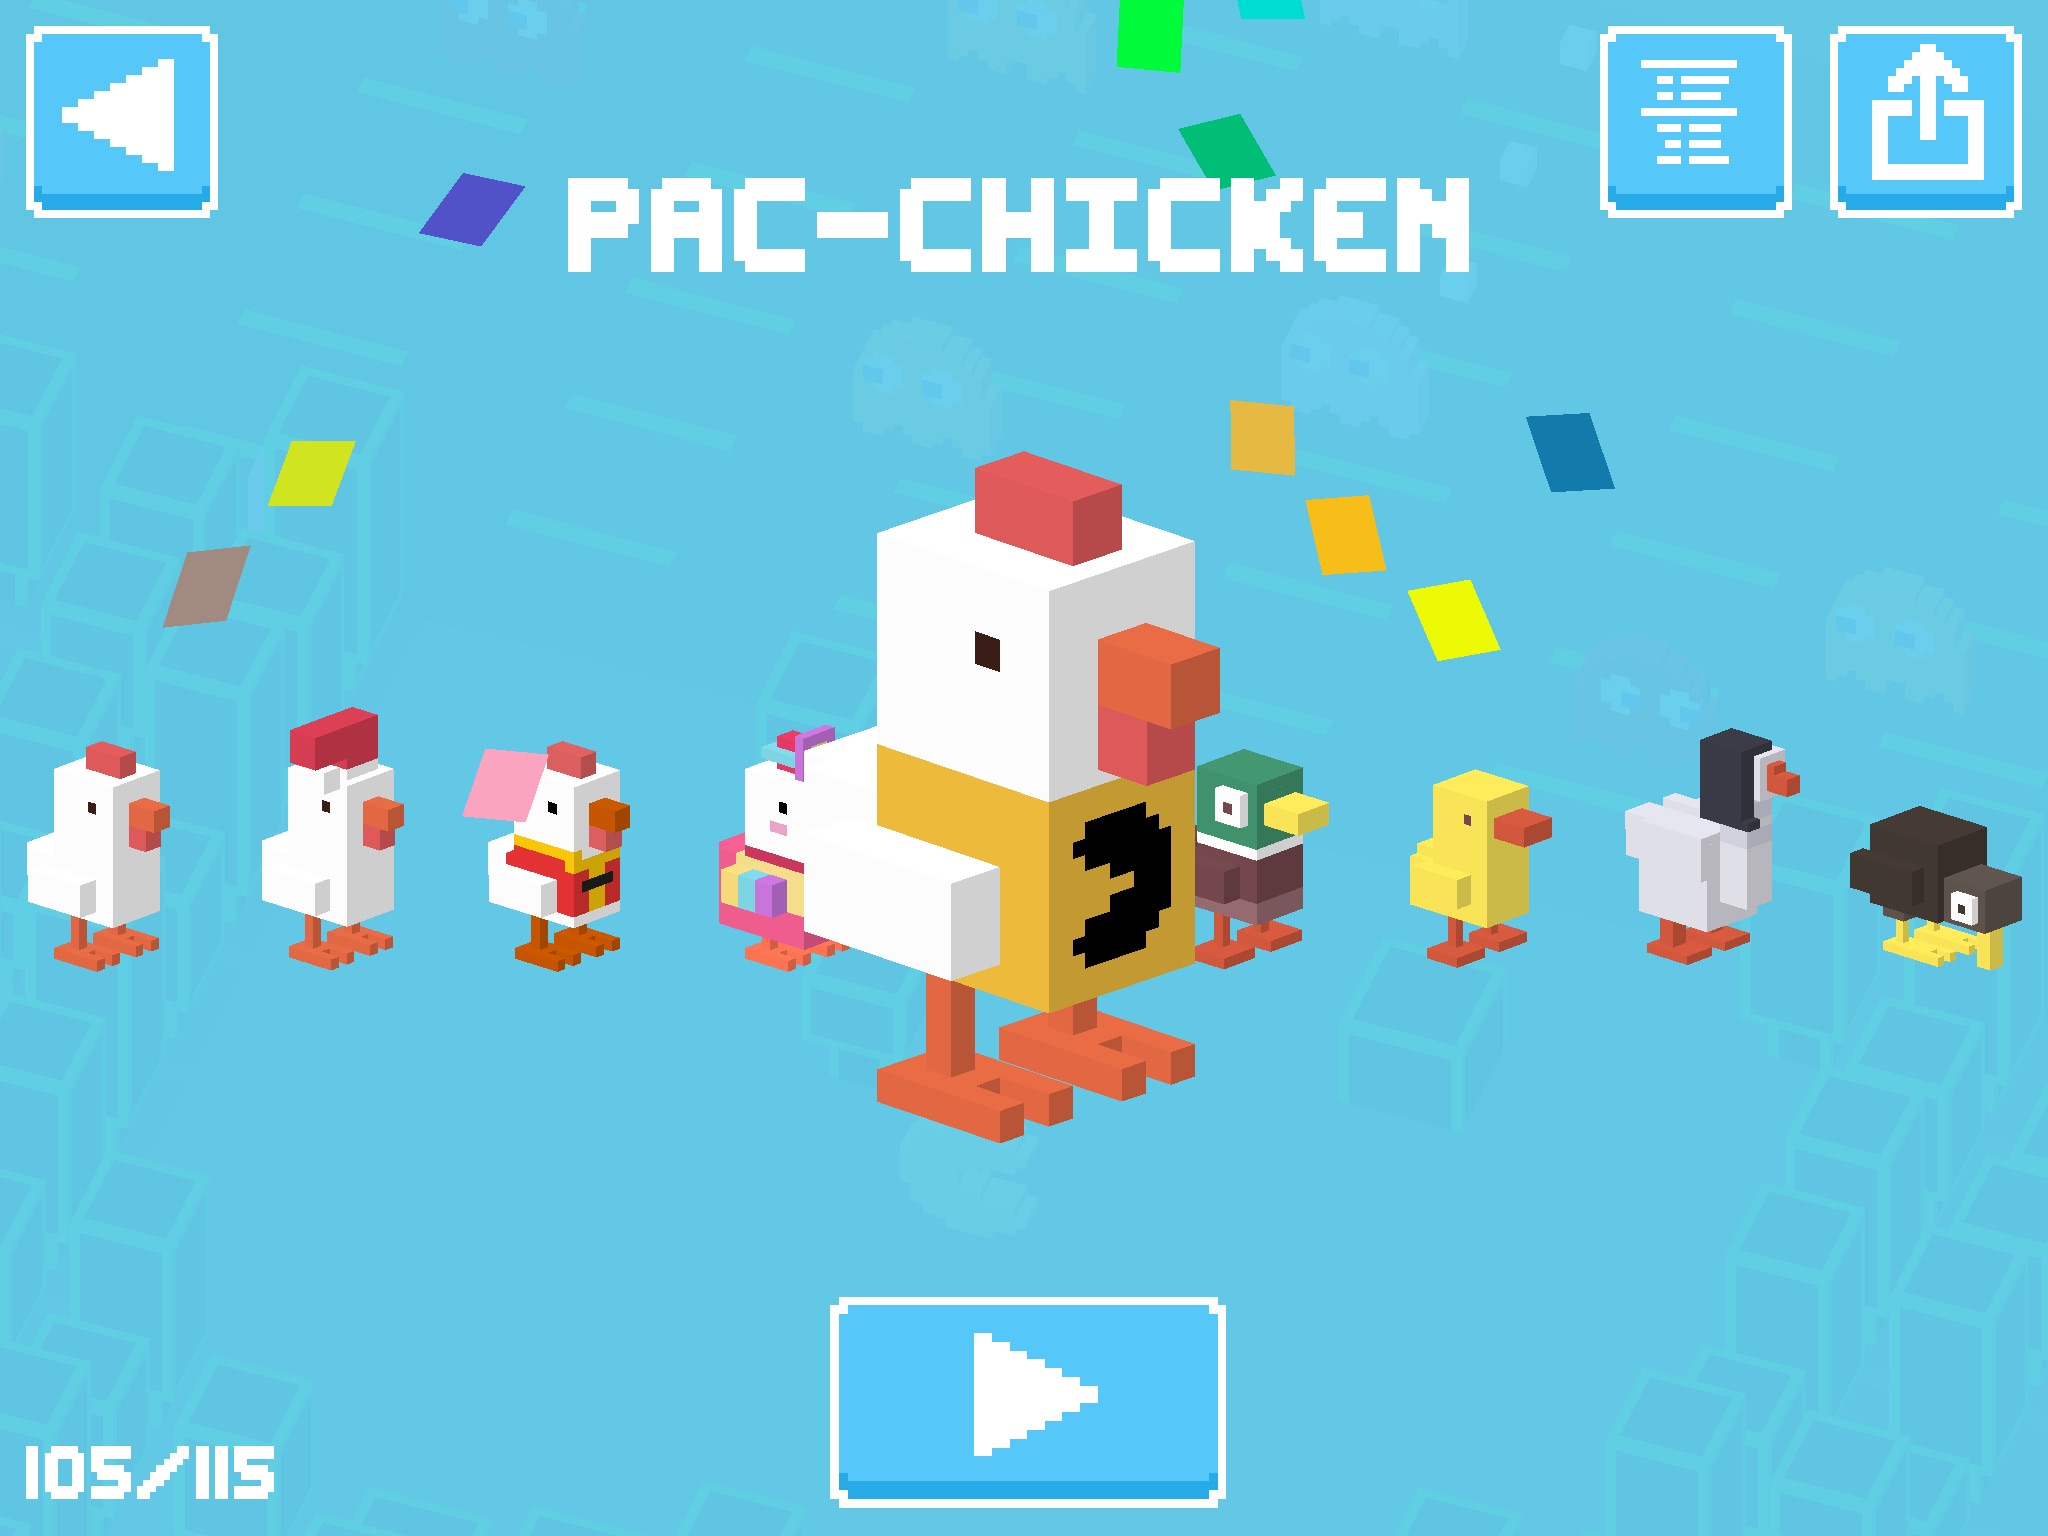 how to get all the pac man characters in crossy road